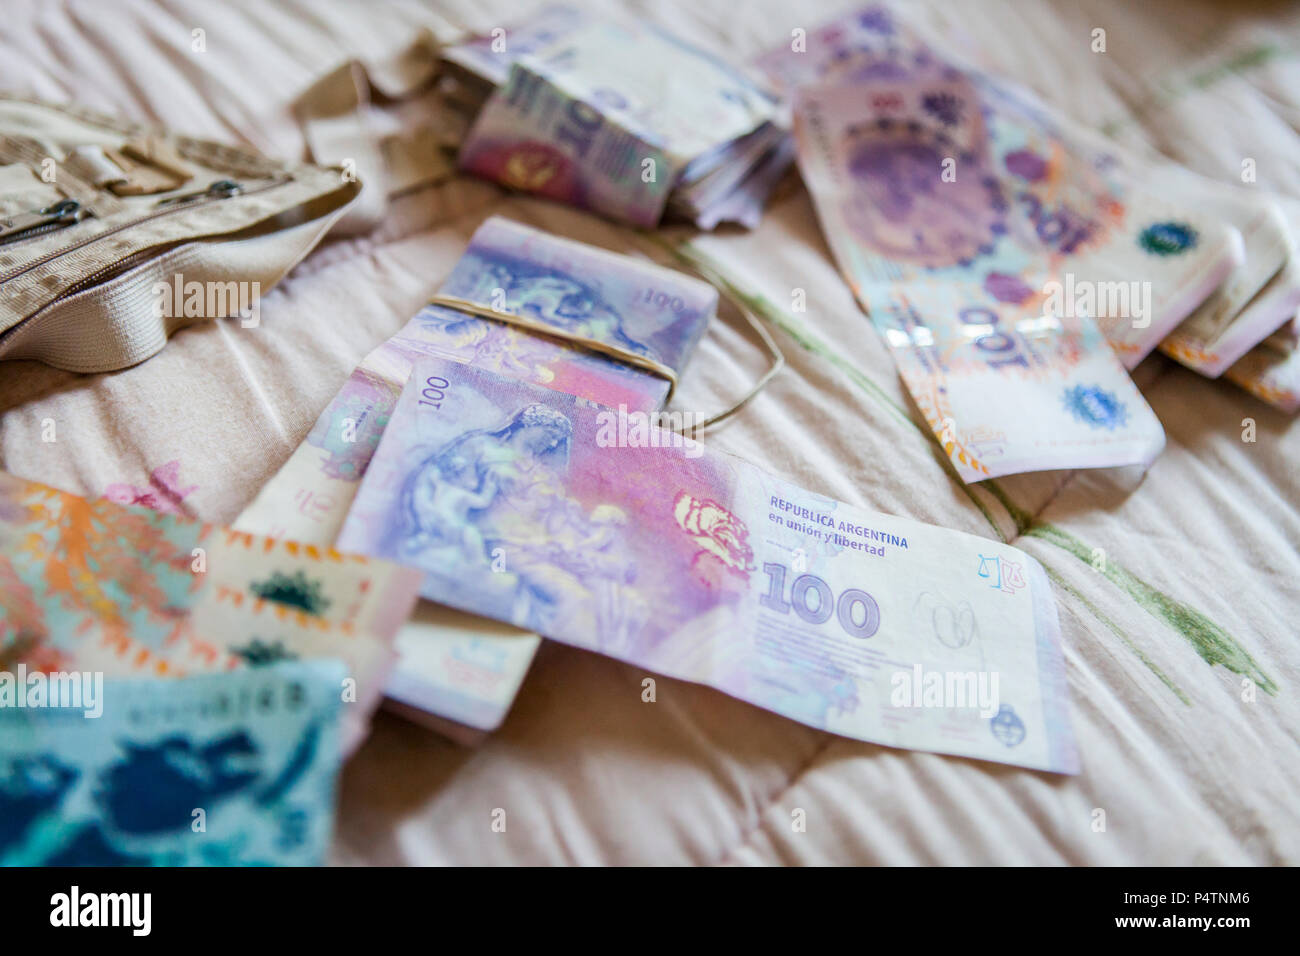 Foreign money, Argentinian pesos, spreaded out on a hotel room bed Stock Photo